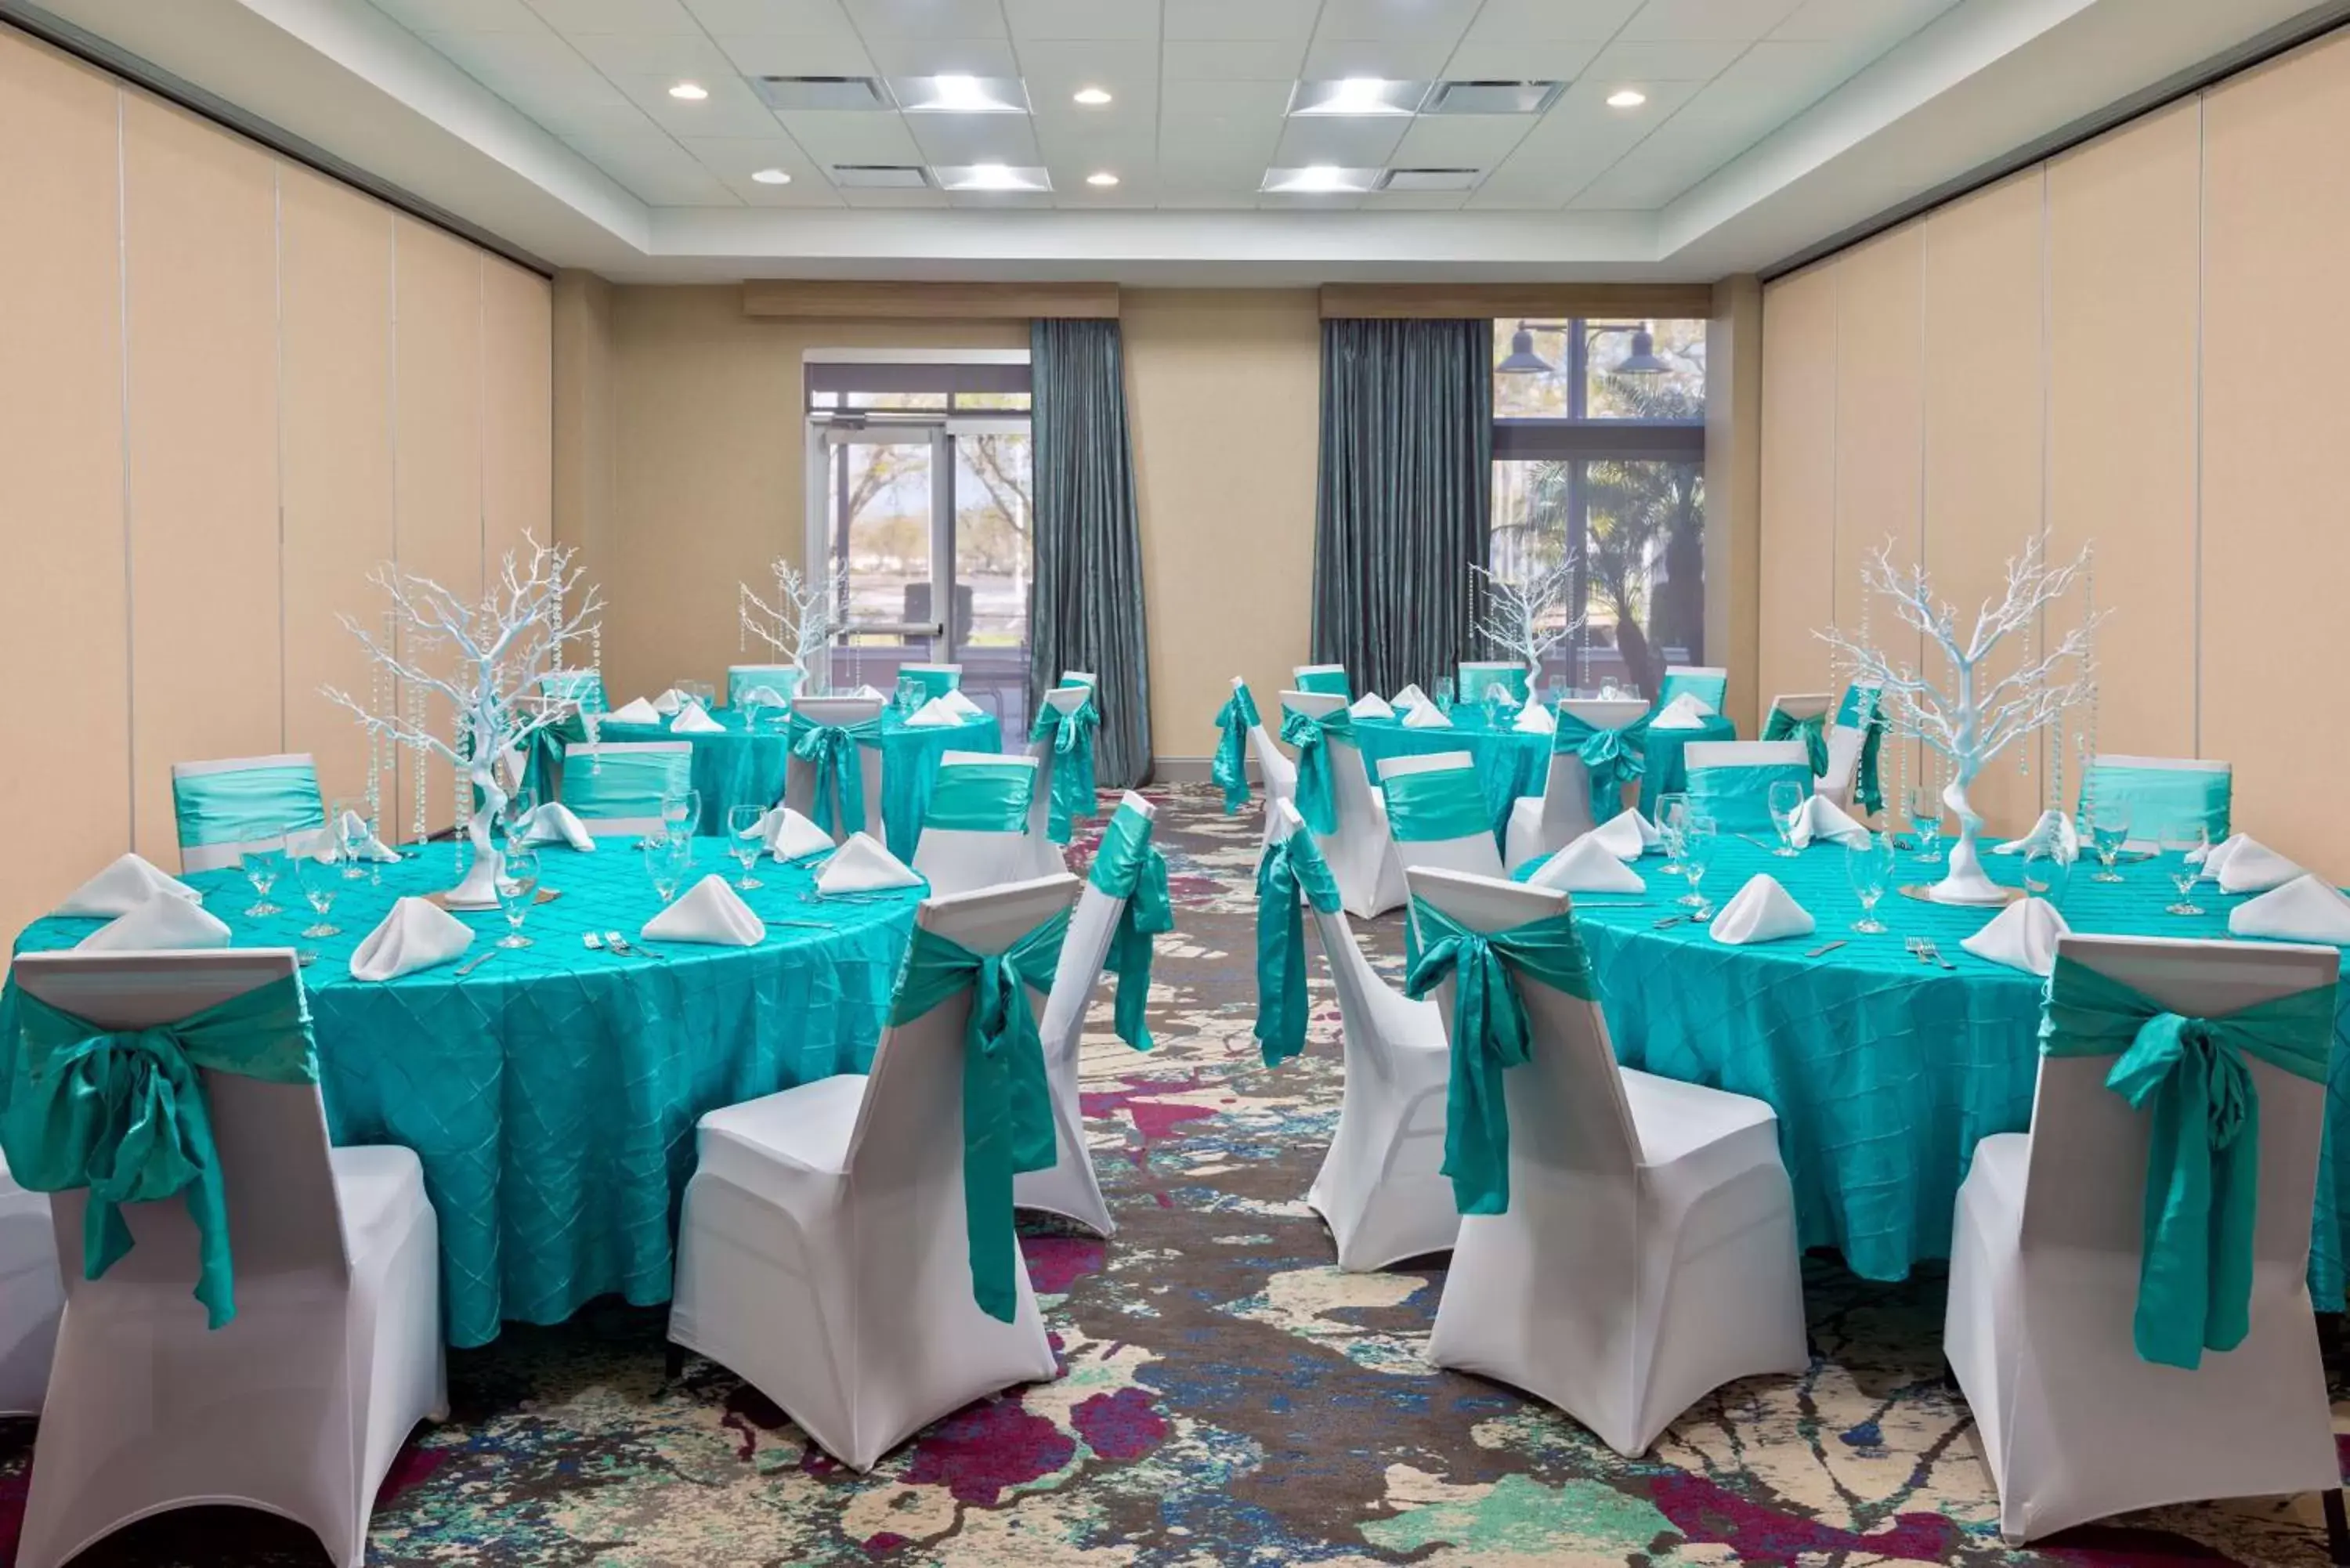 Meeting/conference room, Banquet Facilities in Hilton Garden Inn Tampa Riverview Brandon